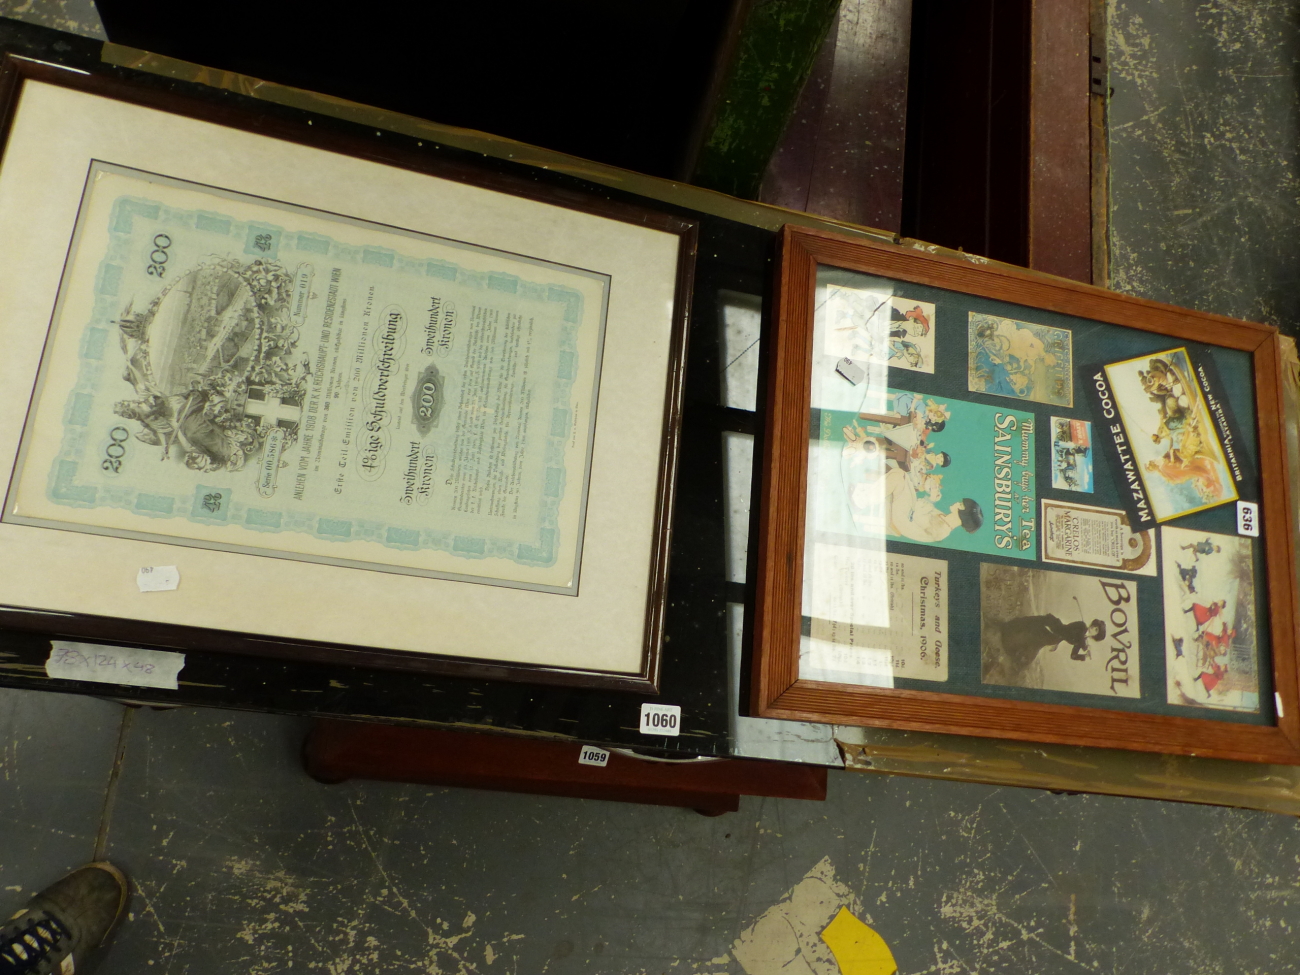 A 1908 AUSTRIAN STOCK OR SHARE CERTIFICATE TOGETHER WITH A FRAME OF ADVERTISING FLIERS